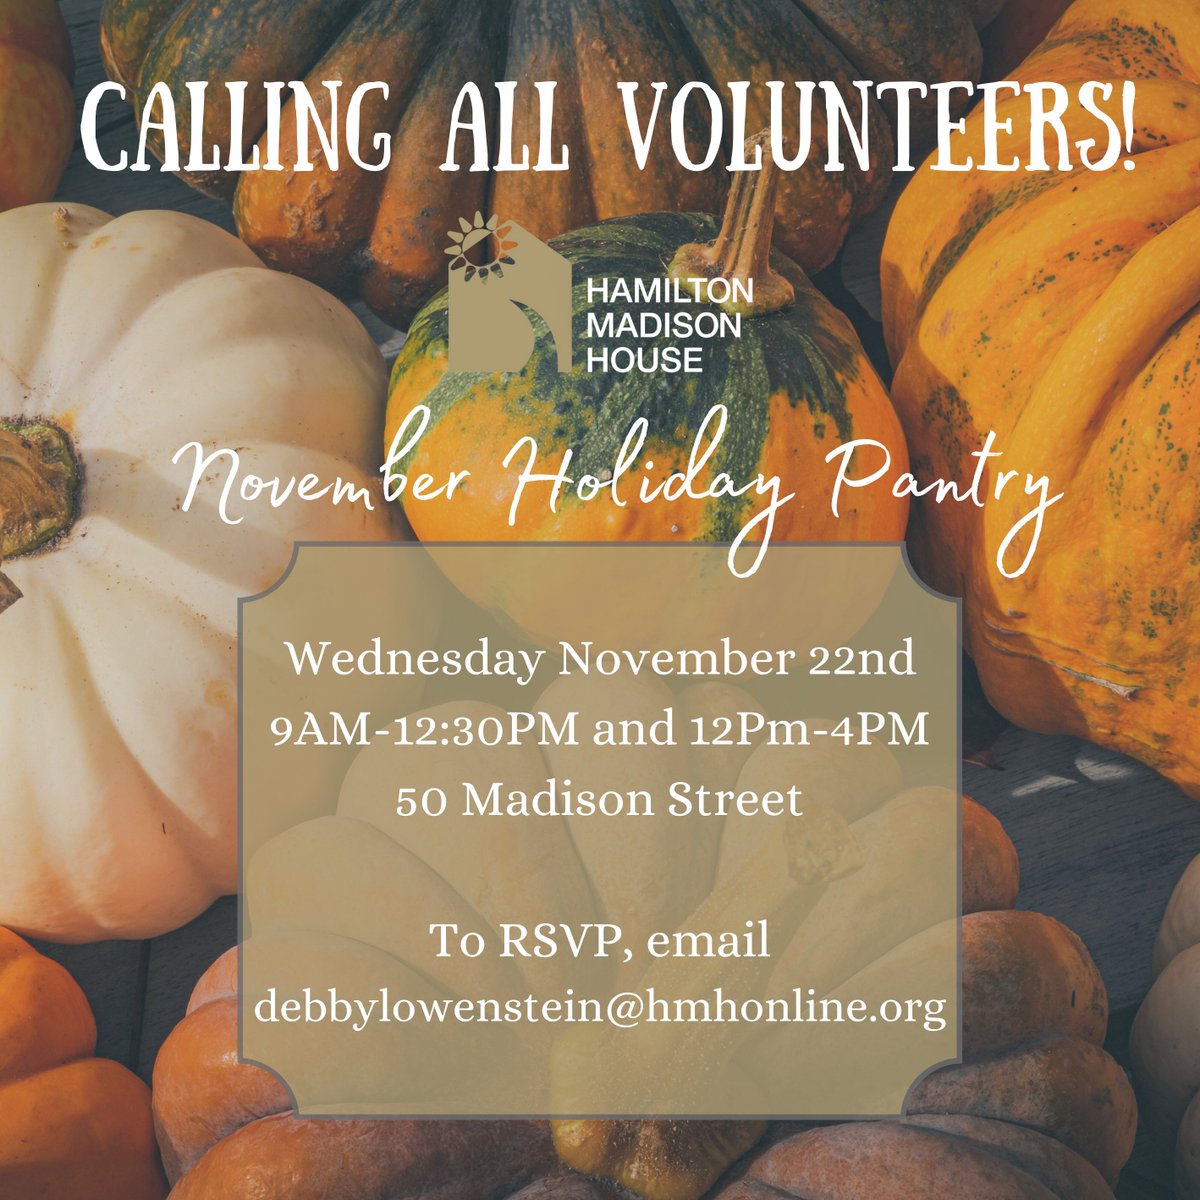 Calling all volunteers! We need sign-ups for the November Holiday Pantry on Wednesday, November 22nd. This event provides over 200 families with essential holiday meals. Breakfast and lunch will be provided to volunteers as well. To RSVP, email debbylowenstein@hmhonline.org! ❤️